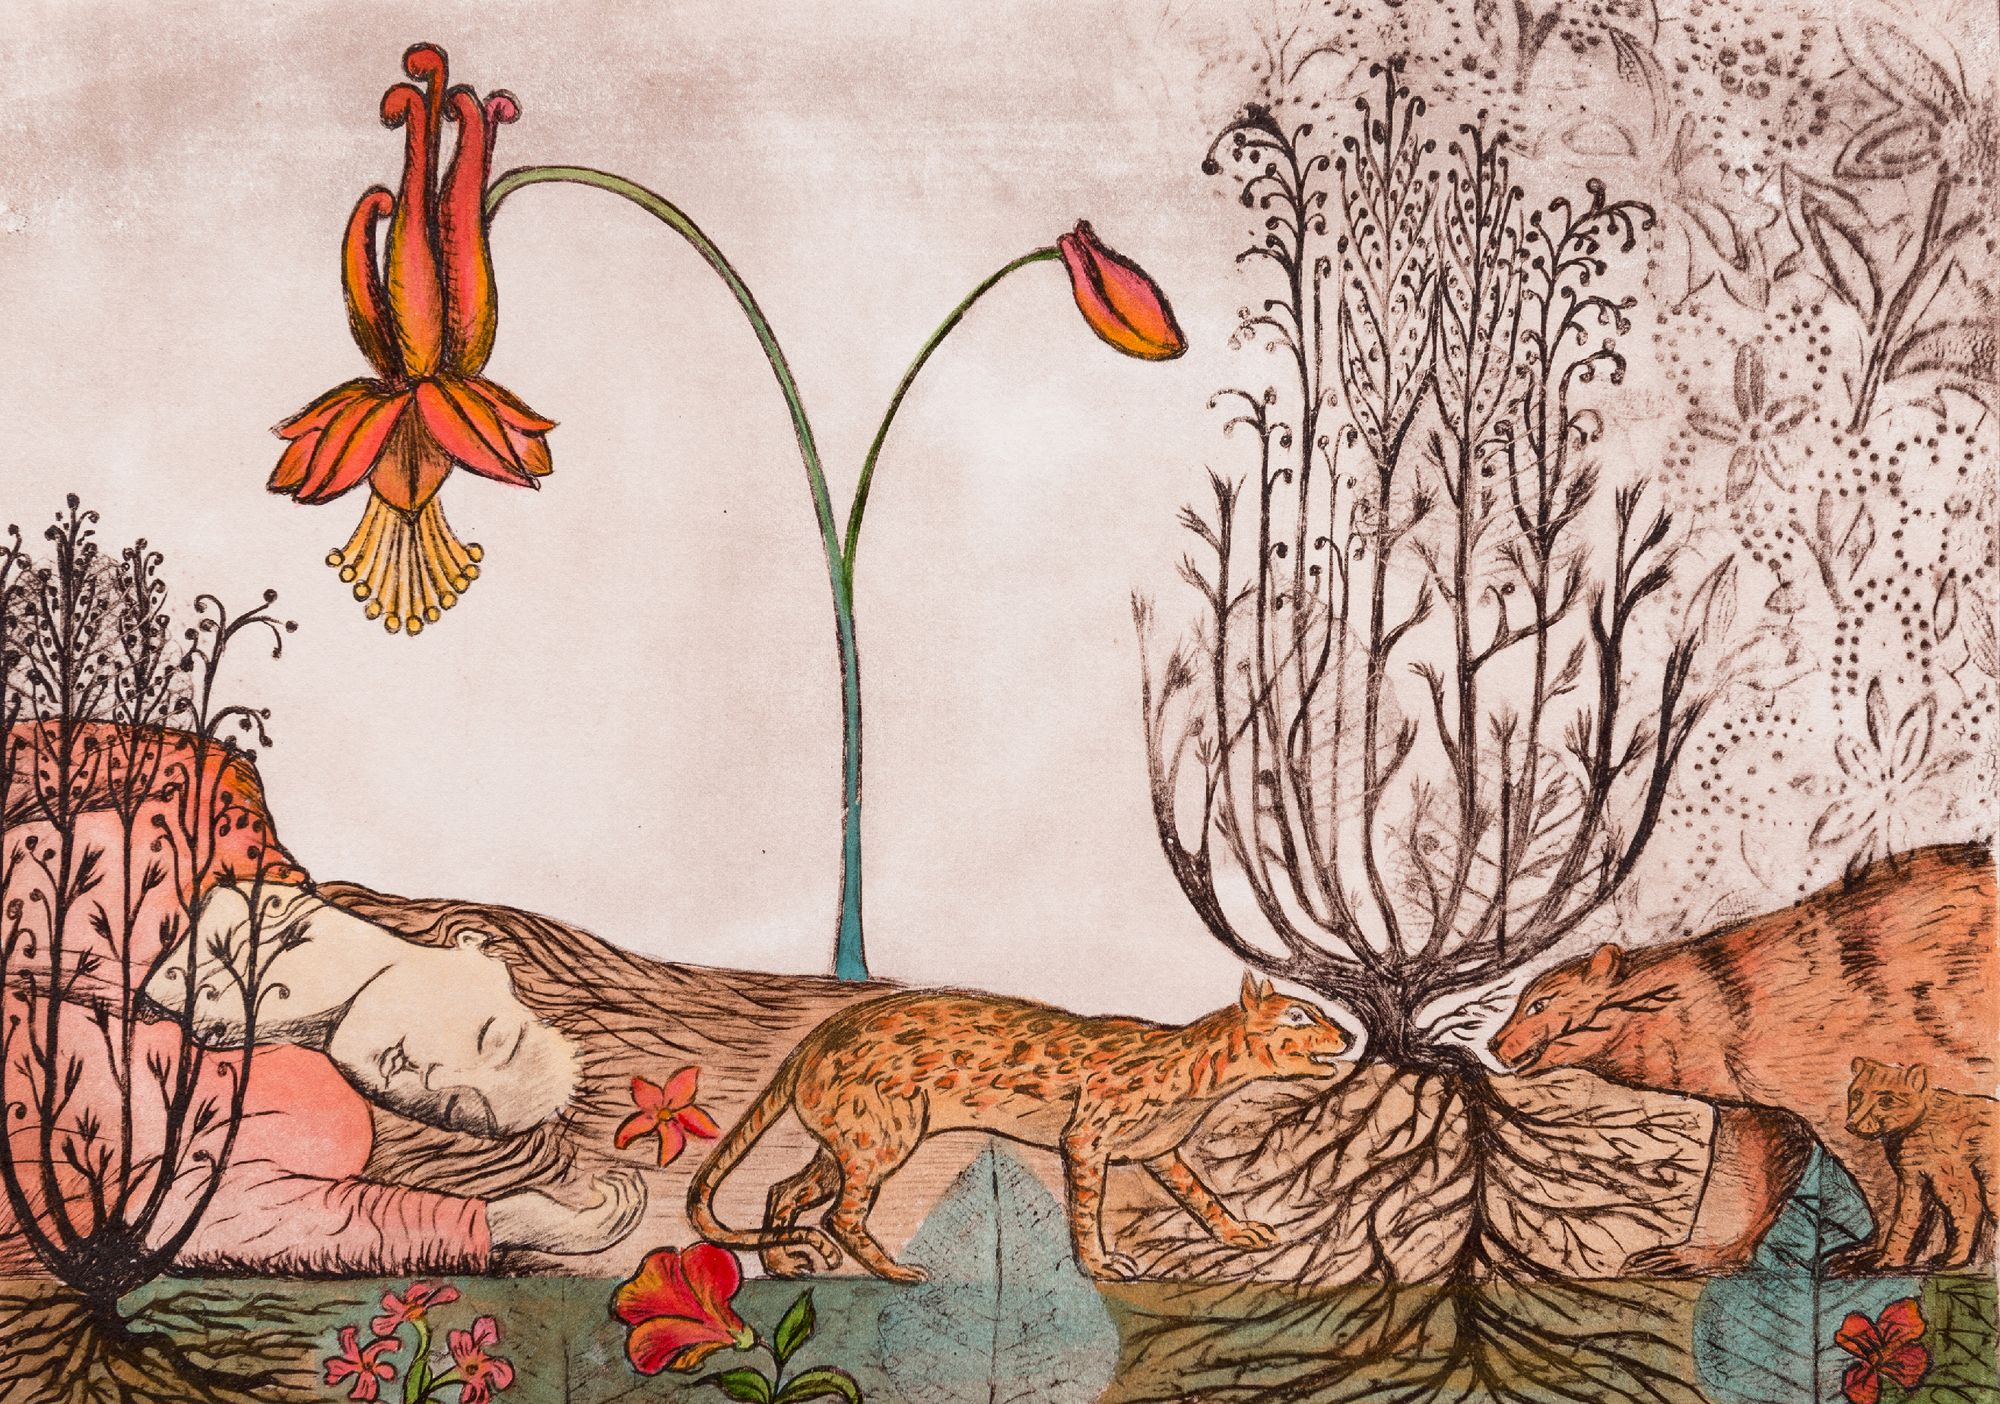 A woman lies at the base of the painting, tigers, bears, flowers and trees feature in the work.